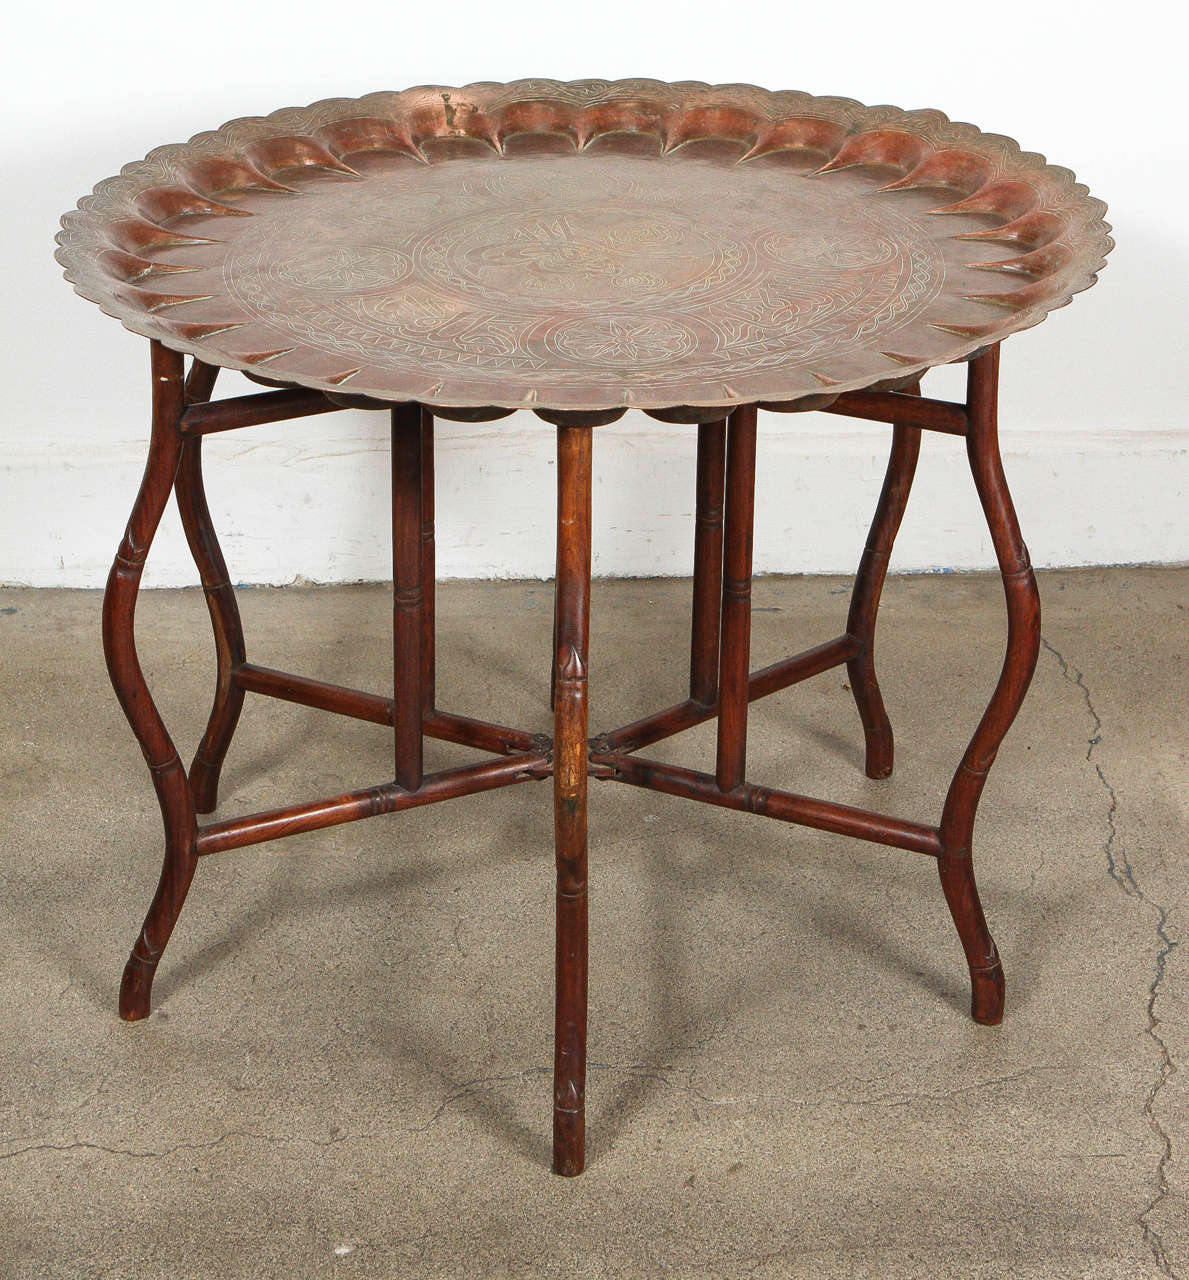 Very hard to find large scaleTurkish copper tray table on bamboo folding base, could be use as a coffee table or game table, this is how they use them in Morocco, Syria, India, Egypt and in the Middle East to serve food or tea or play. Great for